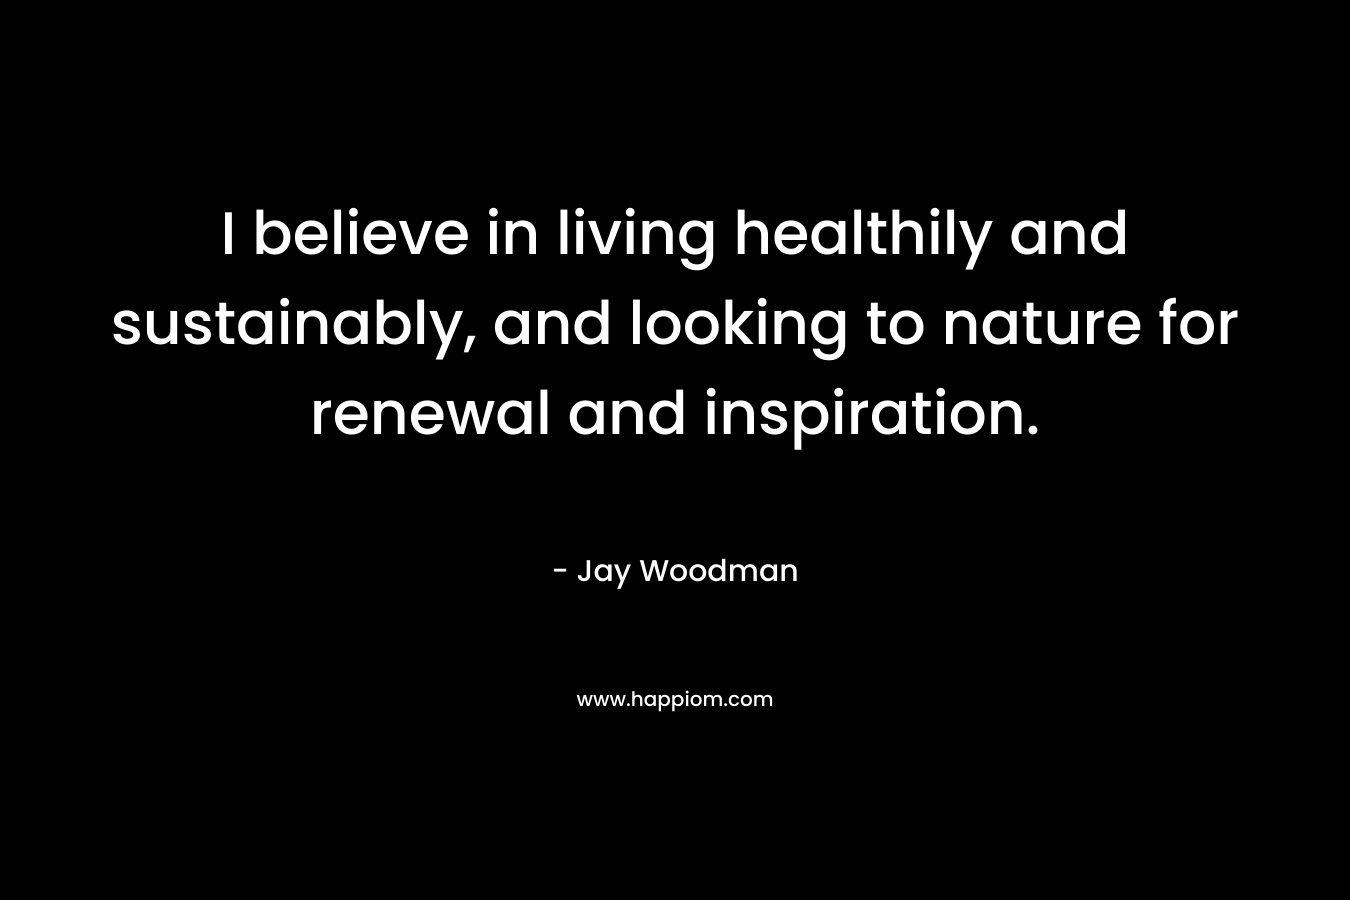 I believe in living healthily and sustainably, and looking to nature for renewal and inspiration.